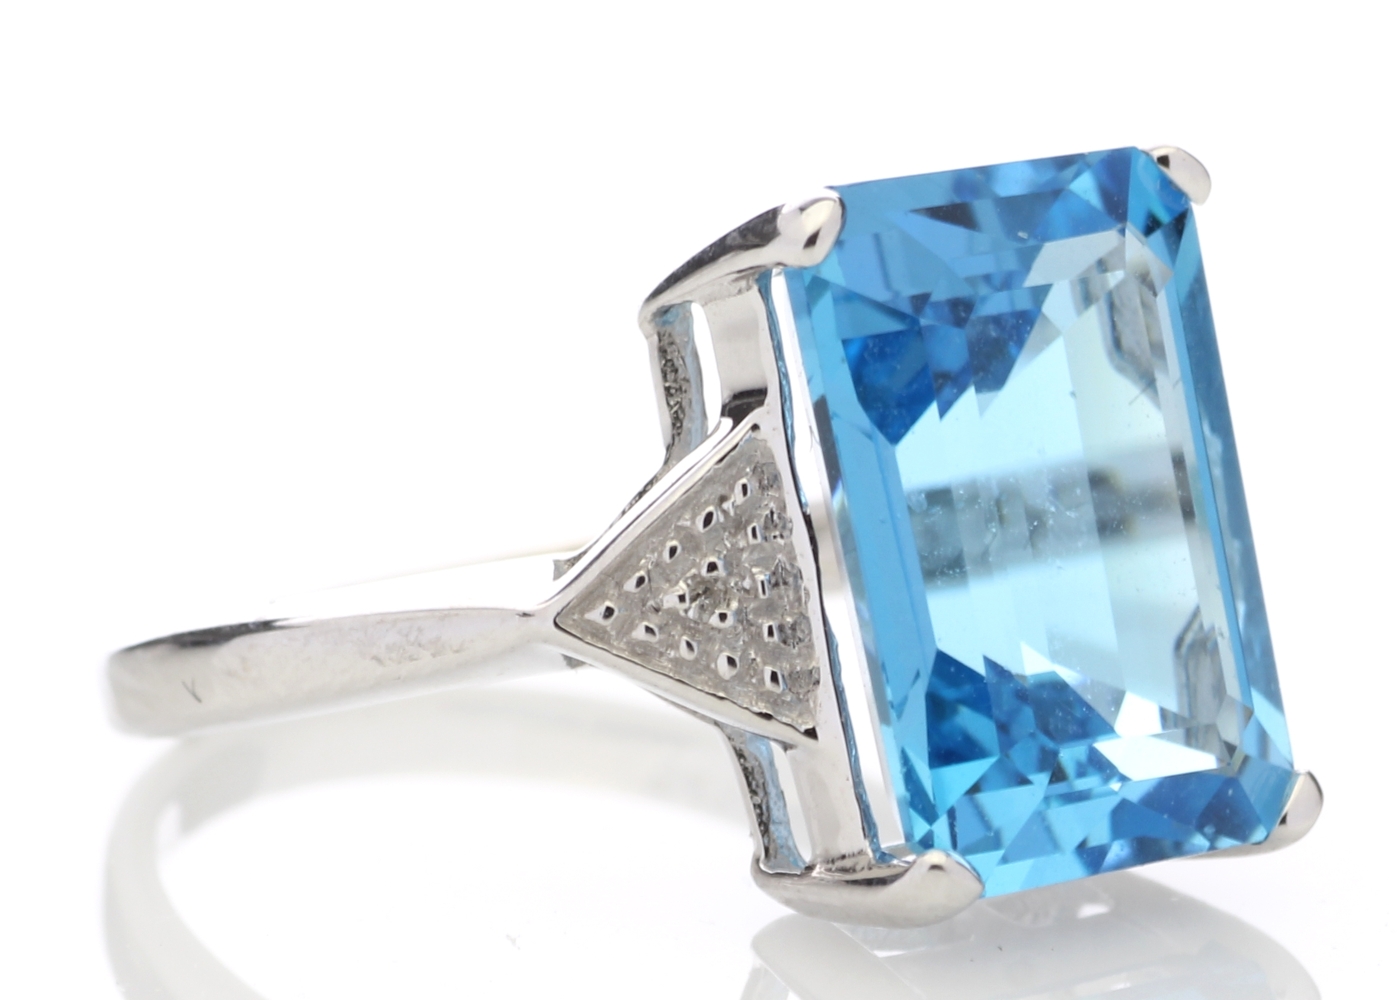 9ct White Gold Diamond and Blue Topaz Ring 8.25 Carats - Image 4 of 7